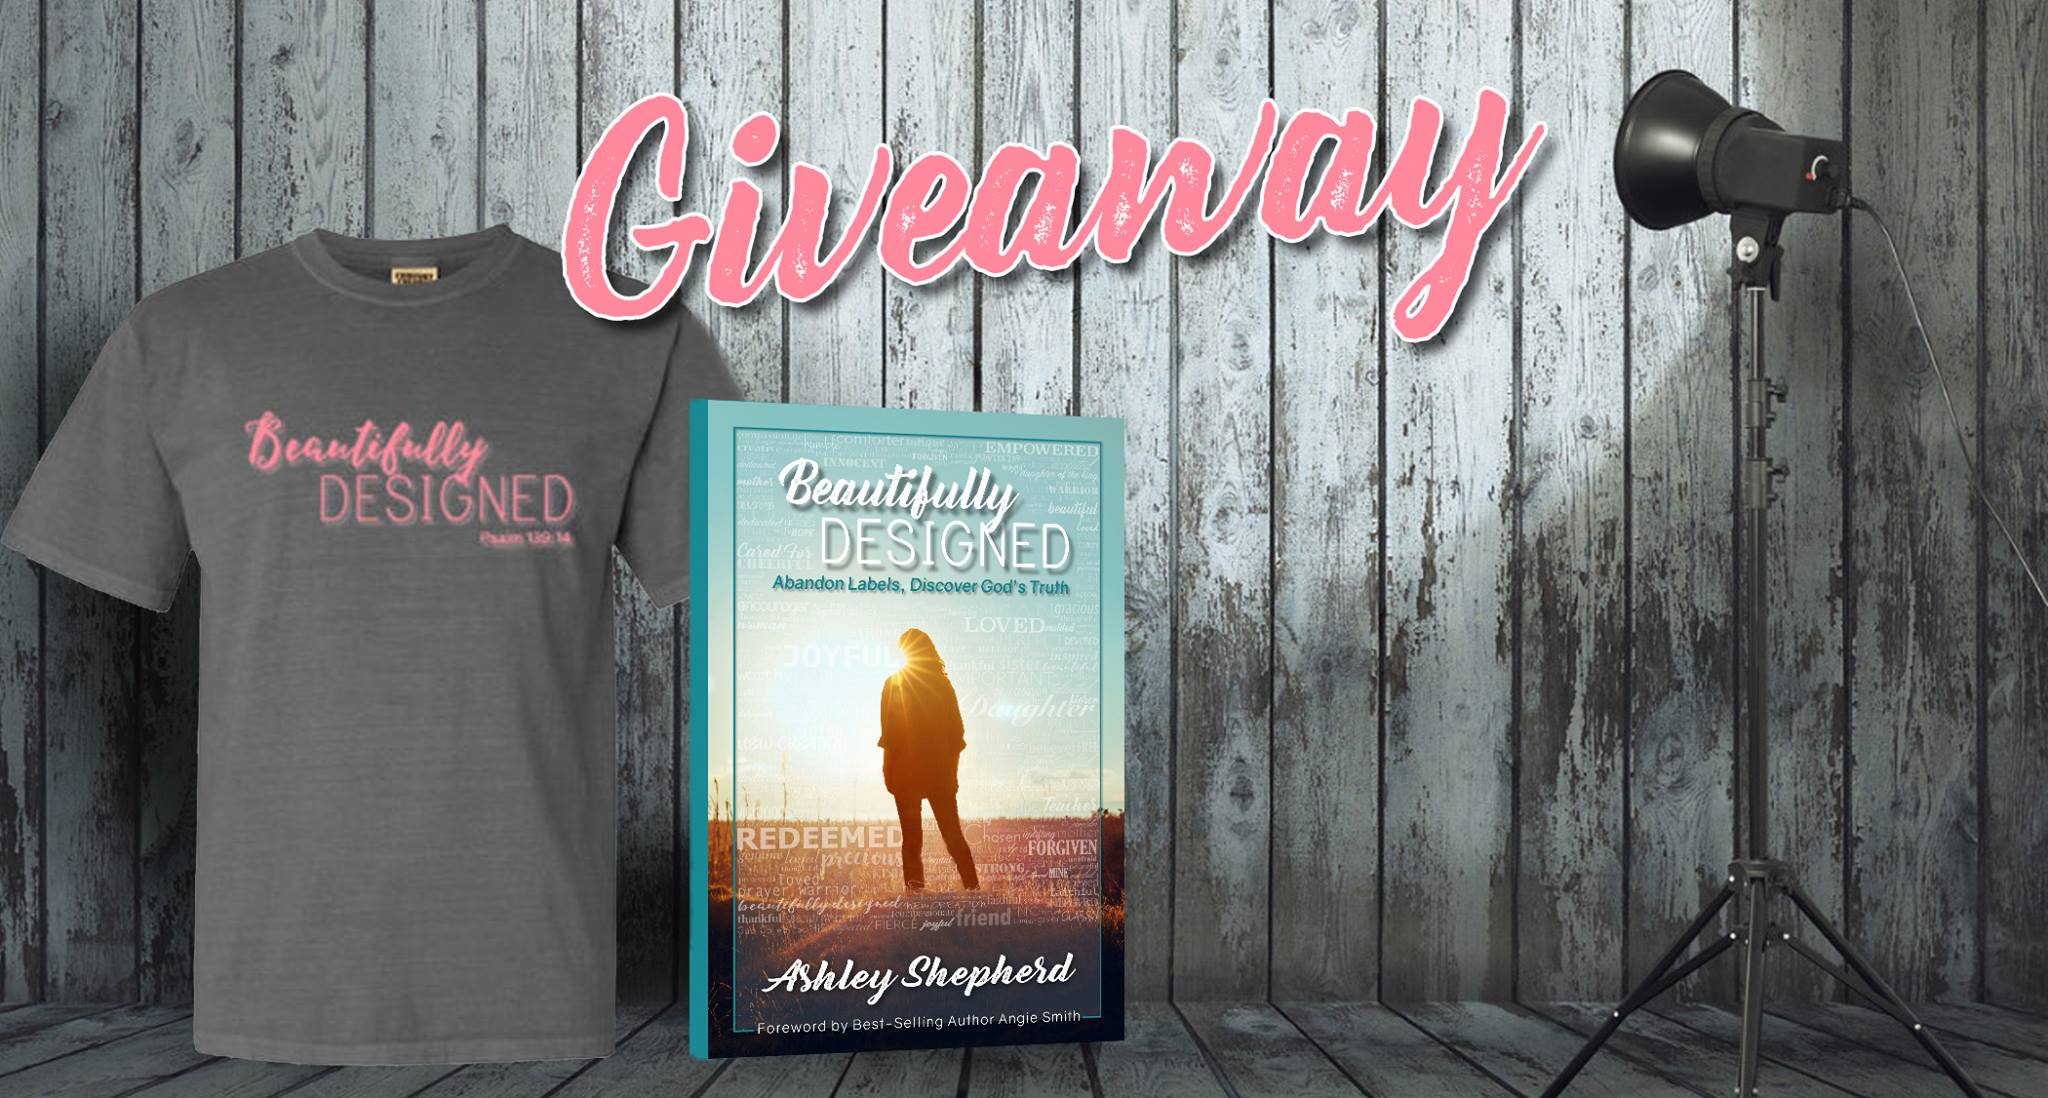 Enter to WIN Beautifully Designed Book & T-Shirt